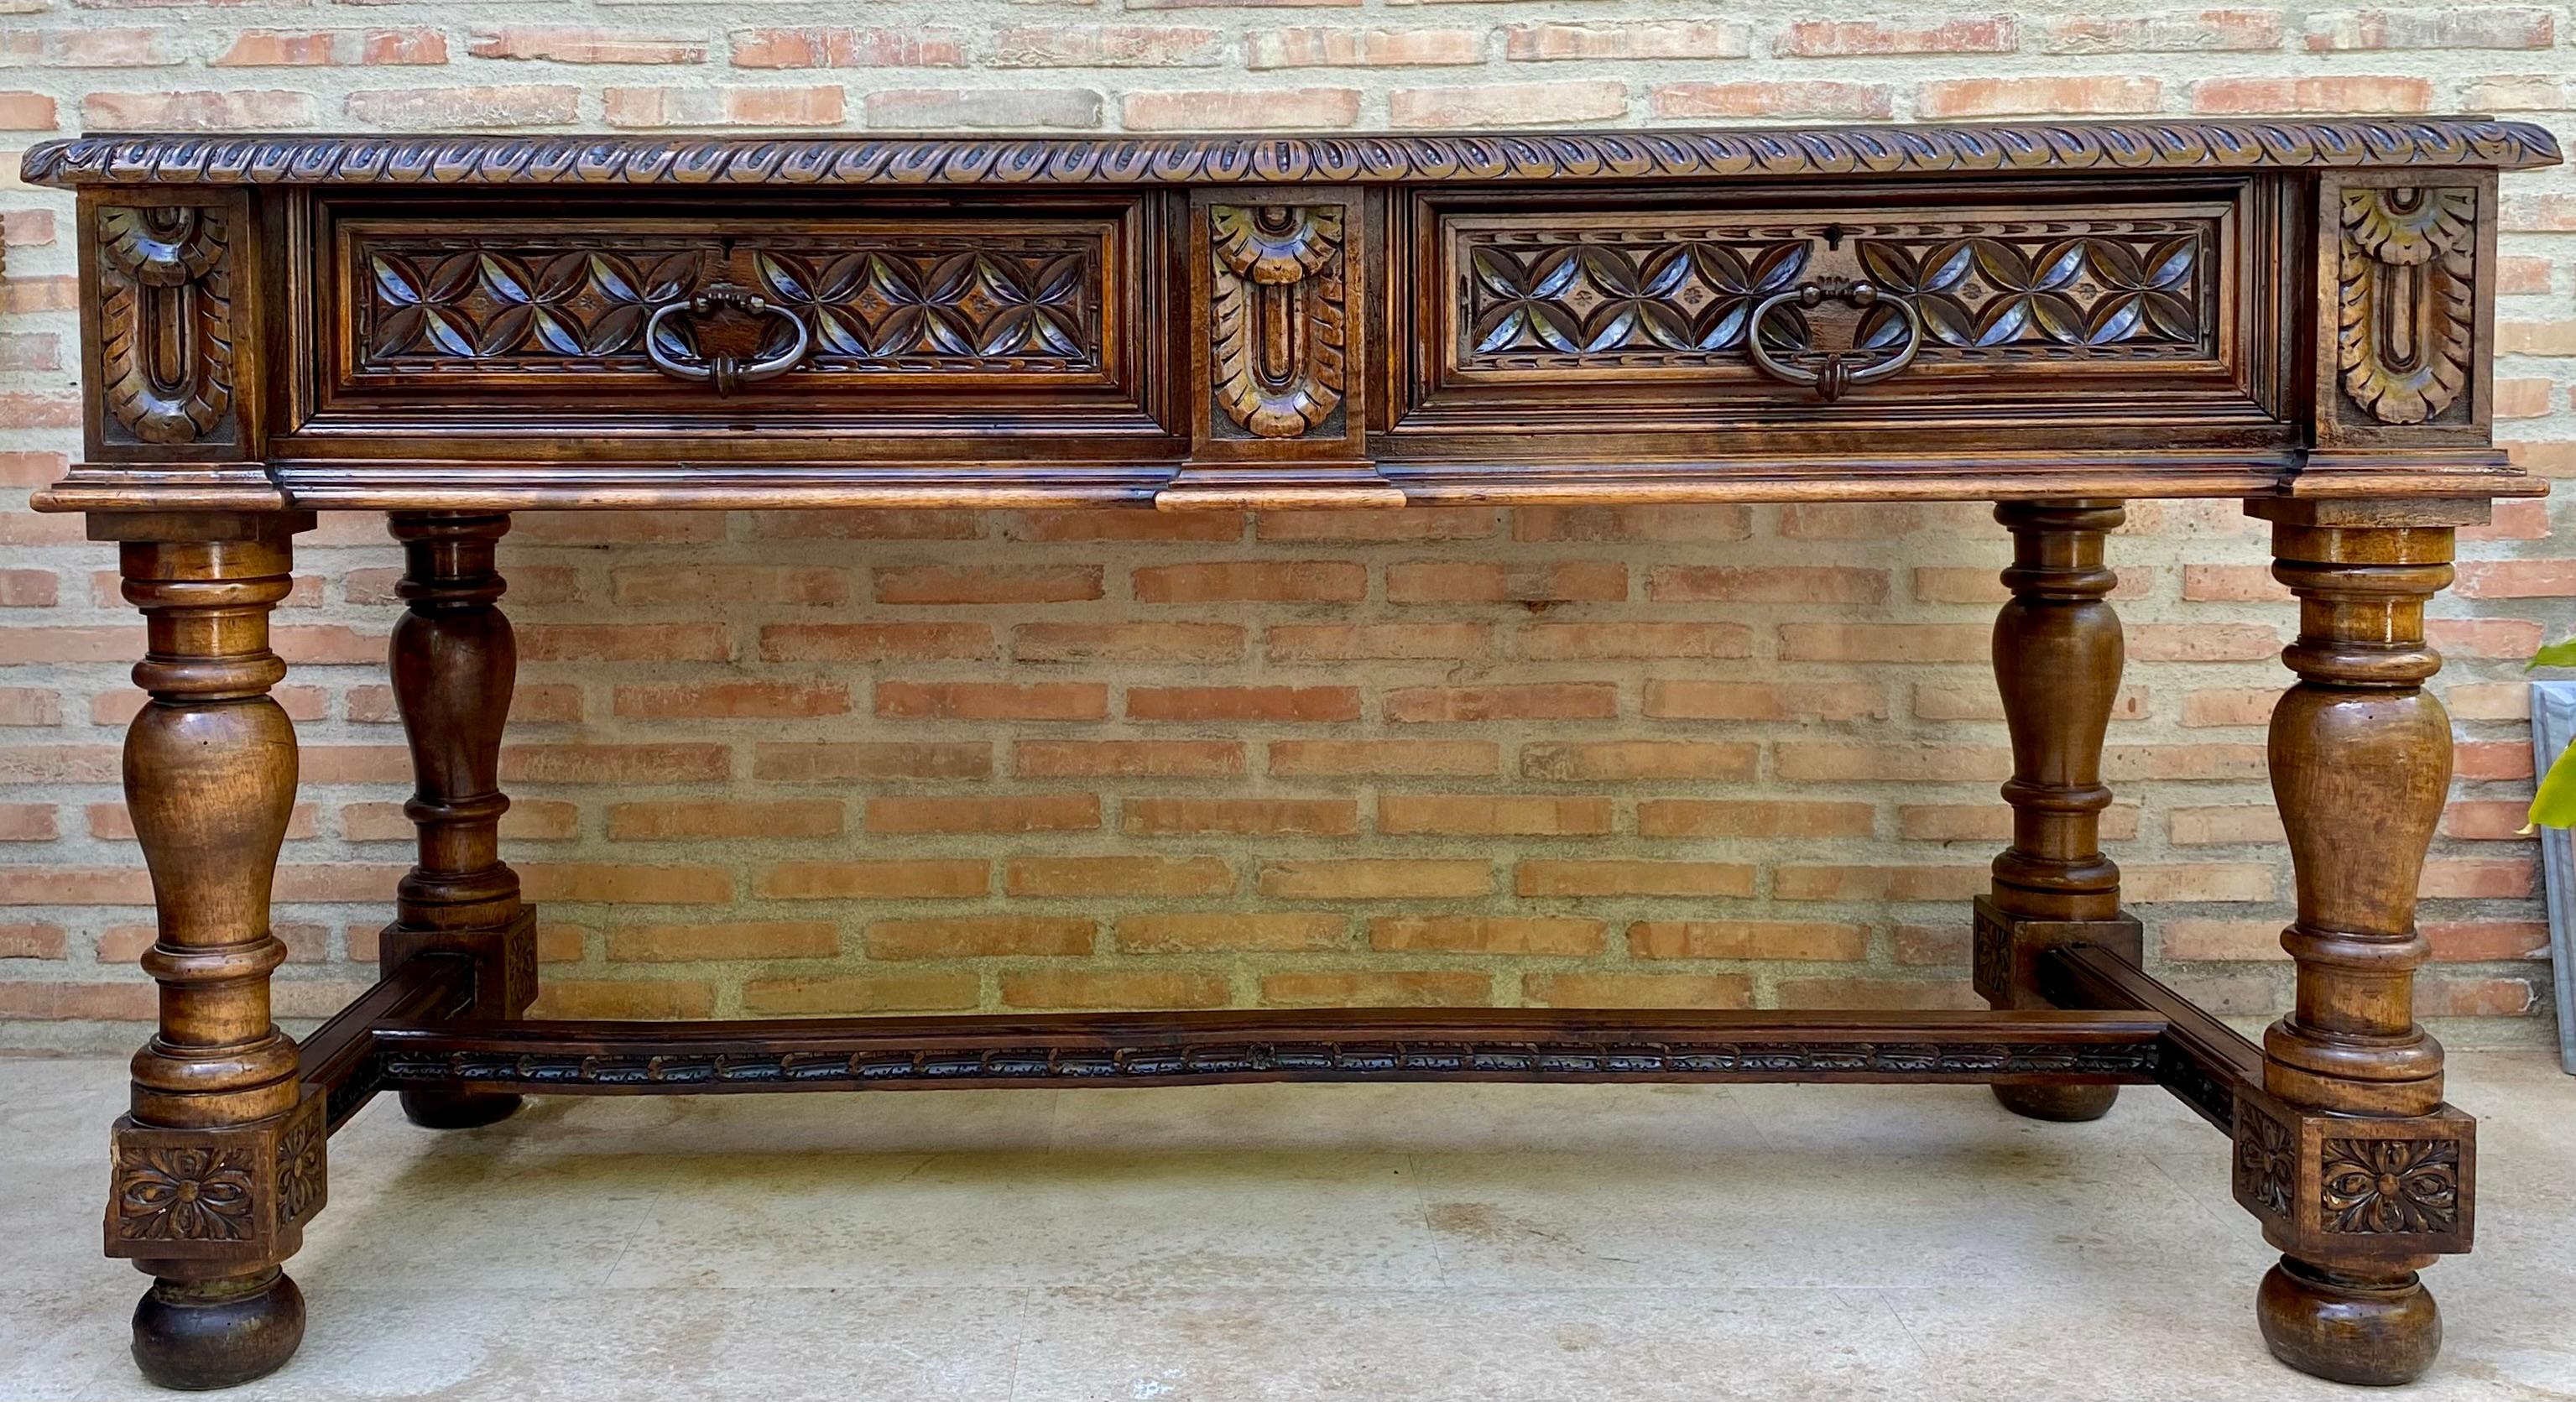 
19th Spanish walnut desk or console table with two drawers and strong turning legs and stretcher.